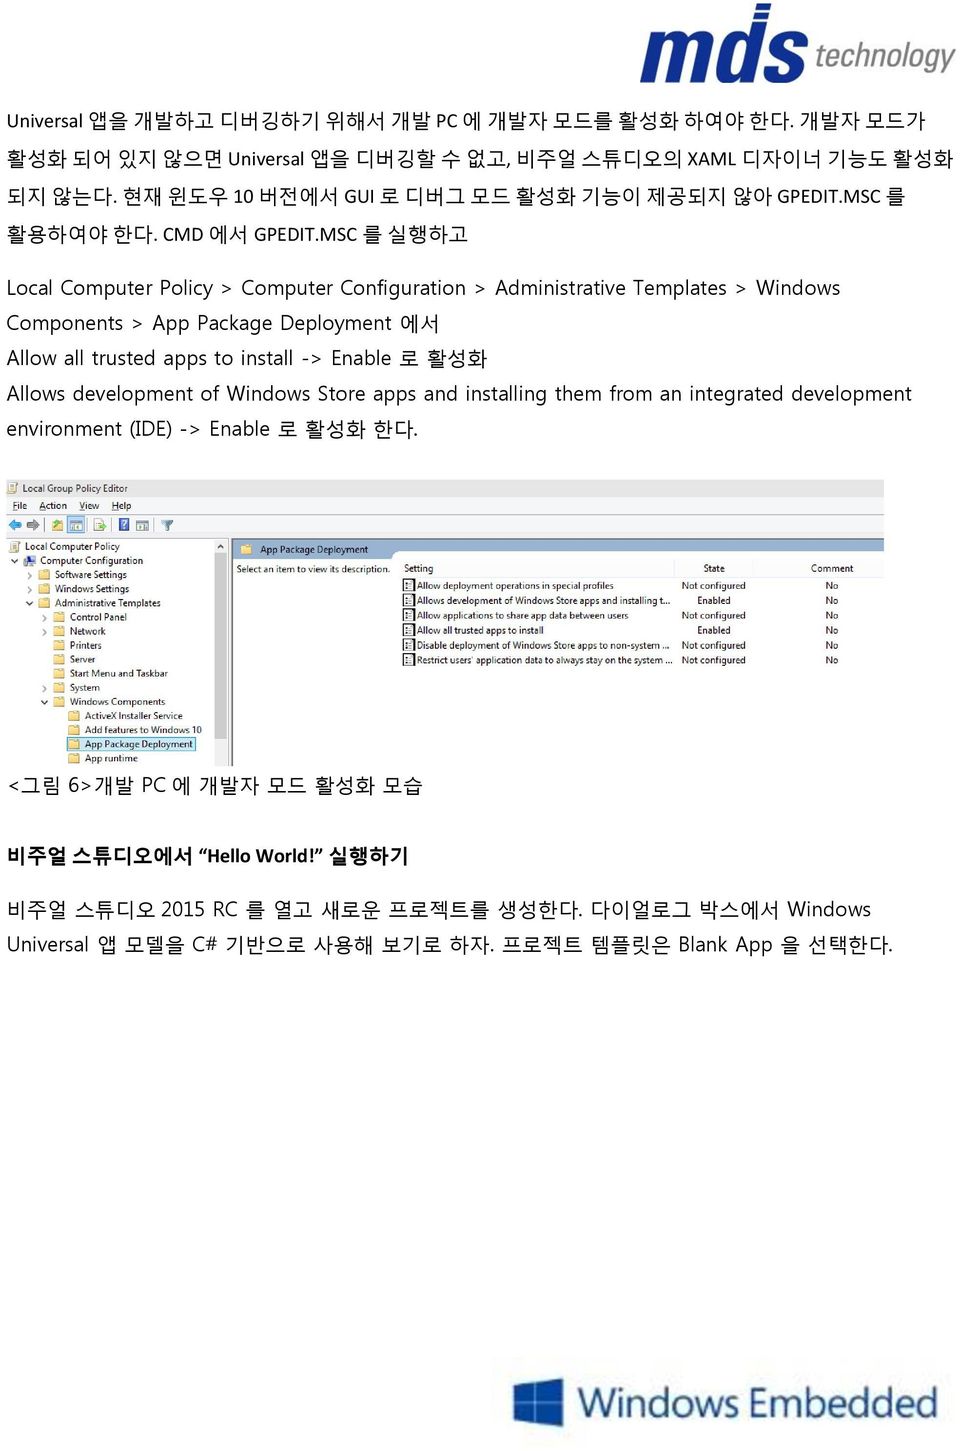 MSC 를 실행하고 Local Computer Policy > Computer Configuration > Administrative Templates > Windows Components > App Package Deployment 에서 Allow all trusted apps to install -> Enable